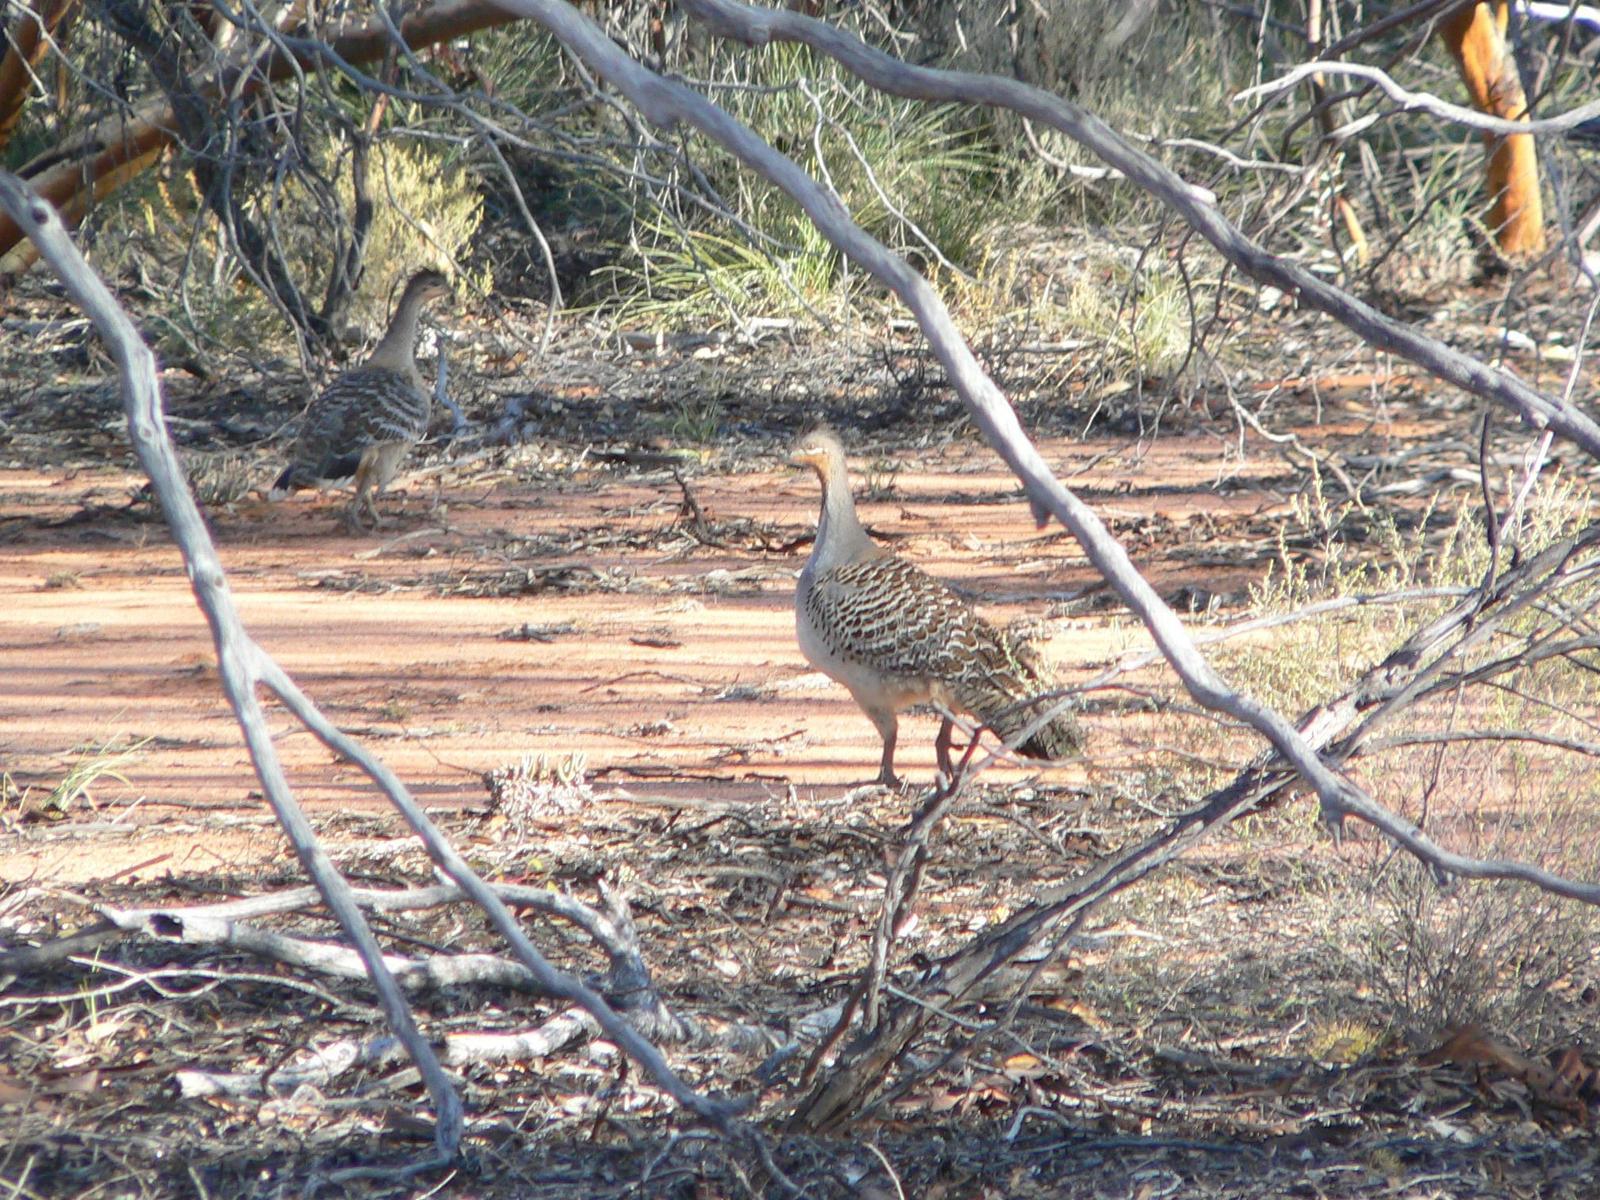 Malleefowl Photo by Peter Lowe